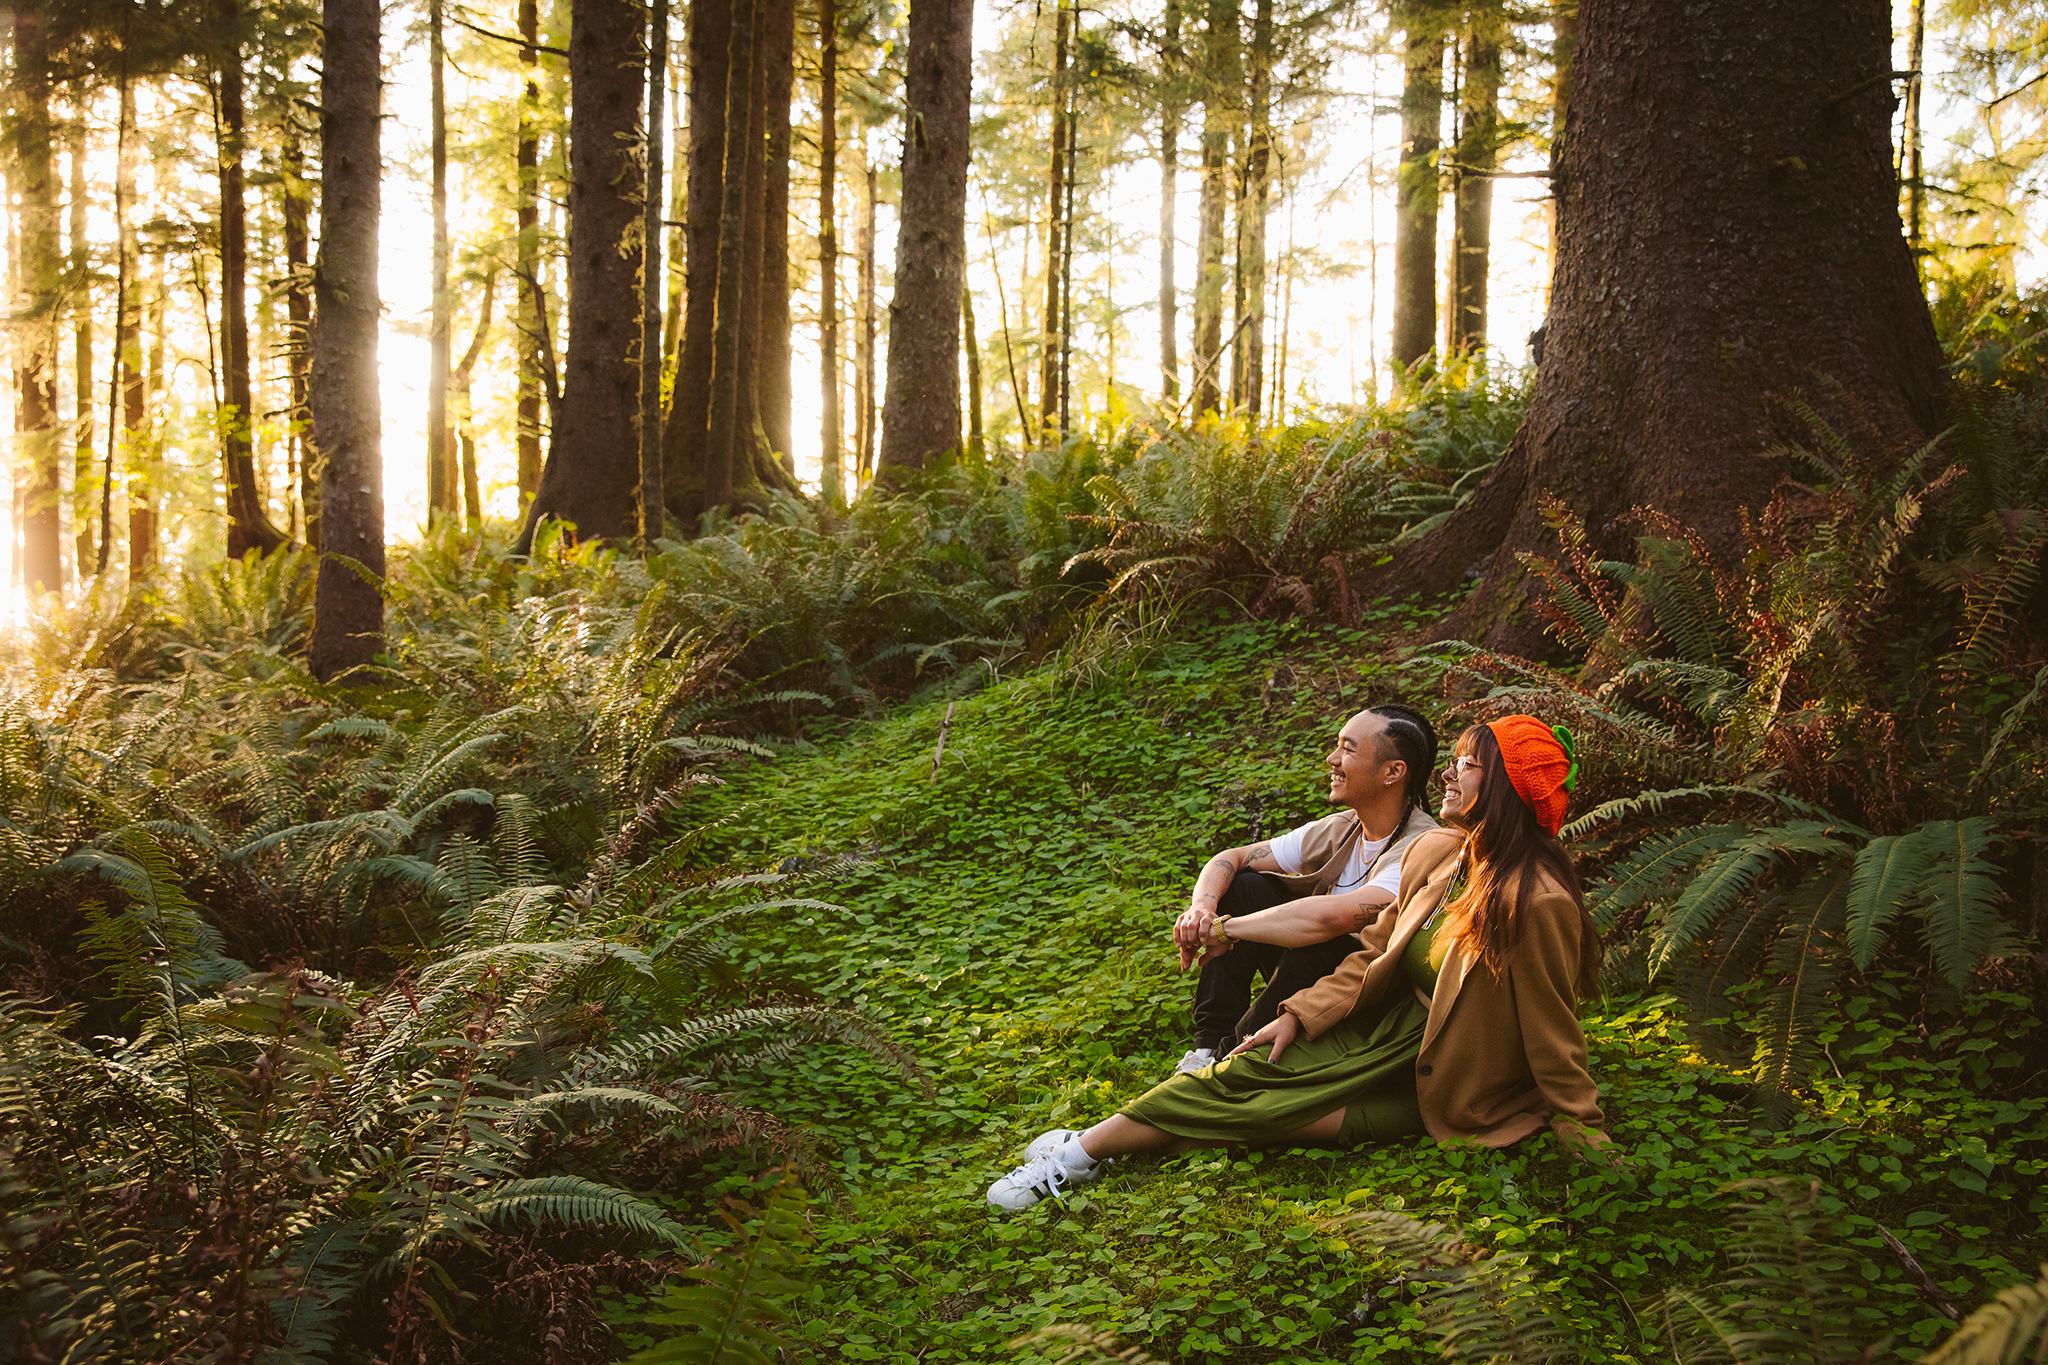 A fern filled engagement photo at Ecola State Park in Oregon